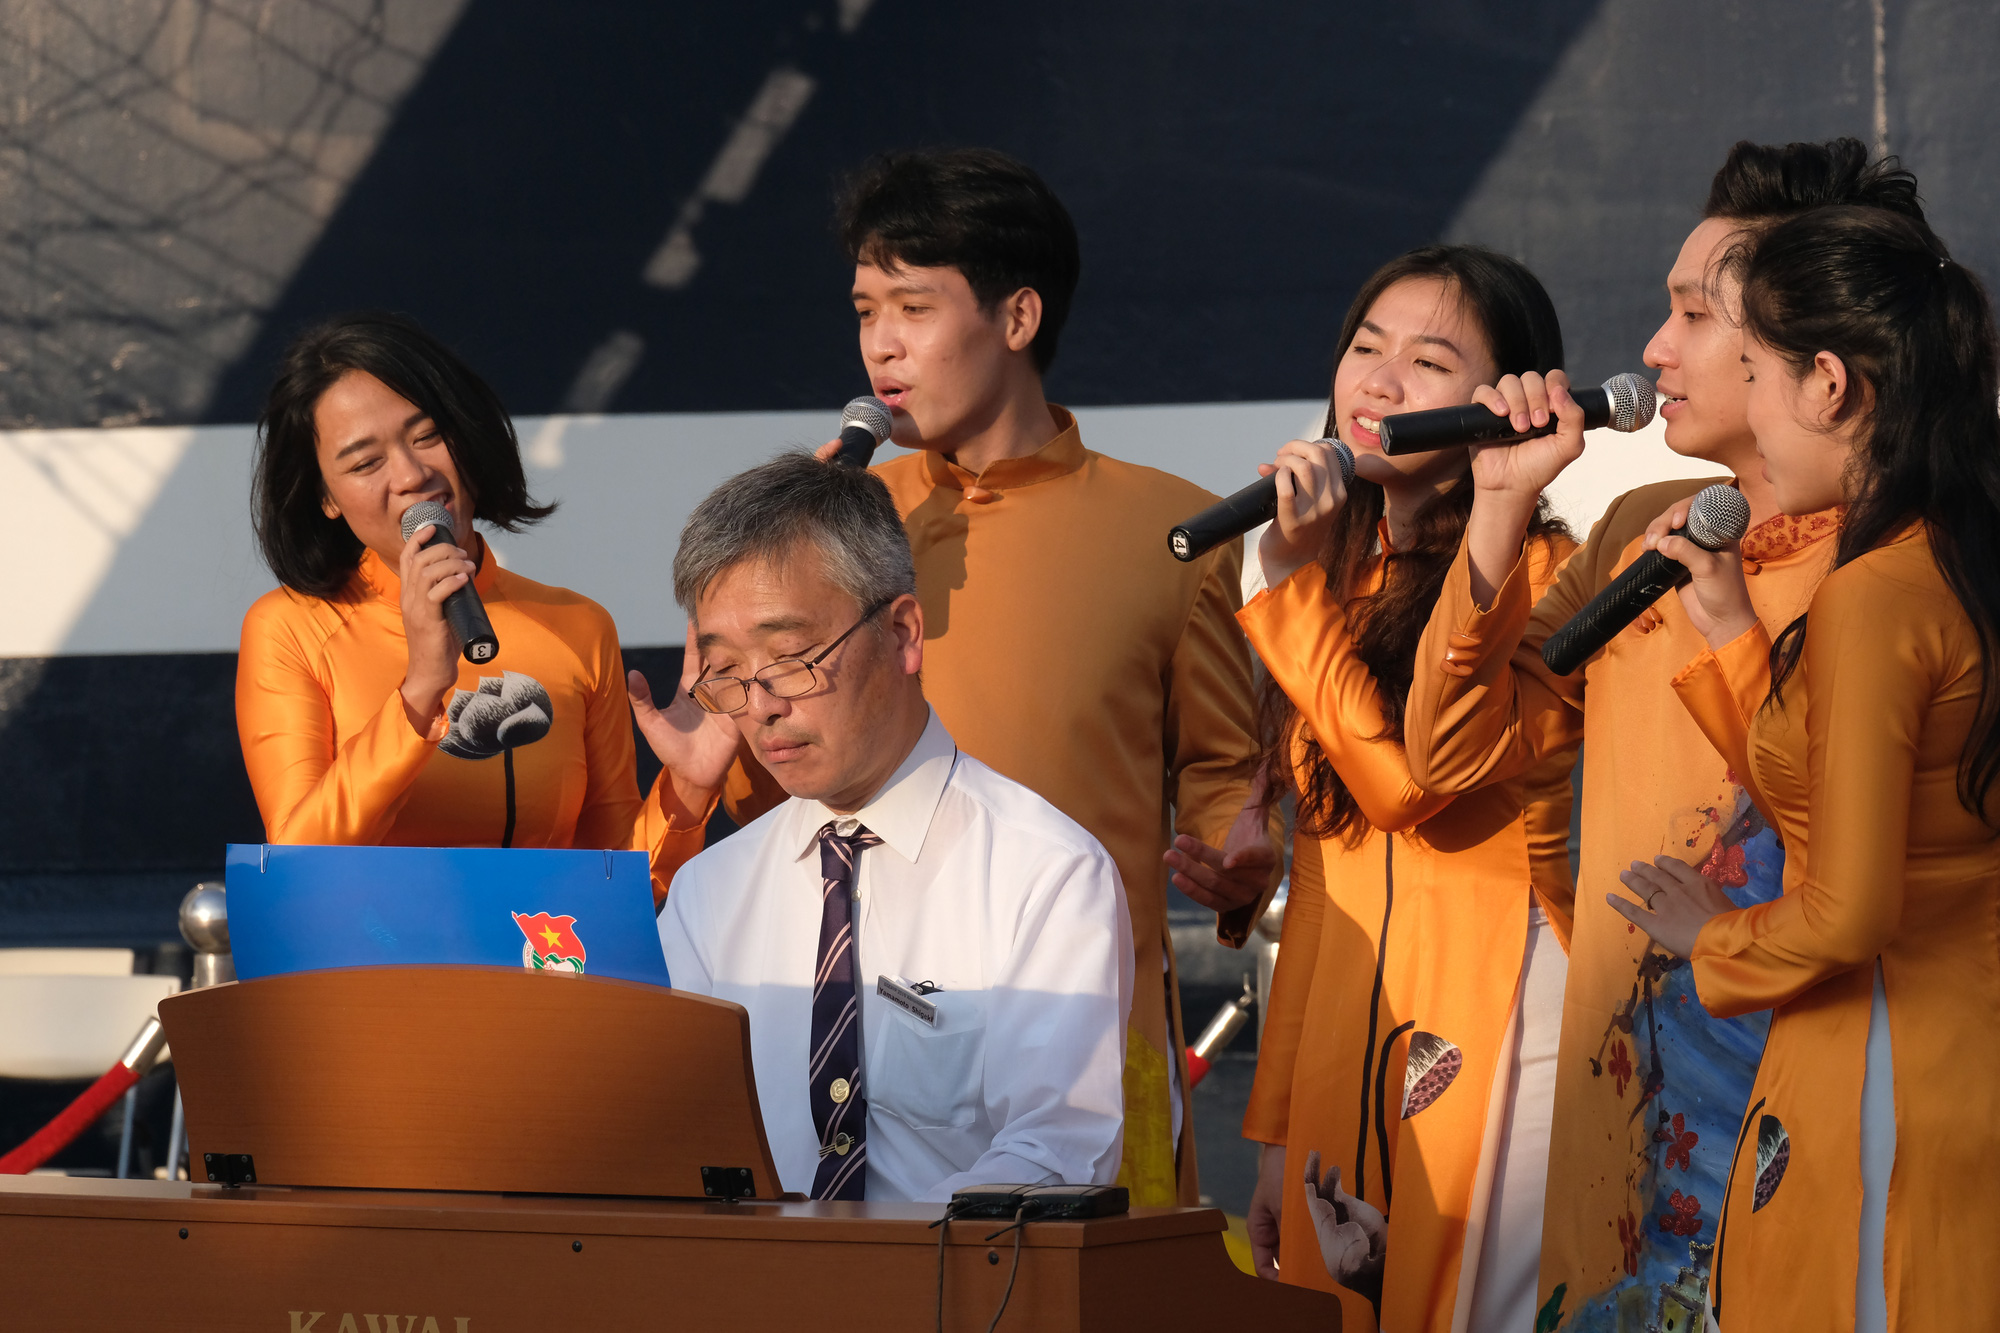 SSEAYP 2019 leader plays piano to bid Ho Chi Minh City farewell